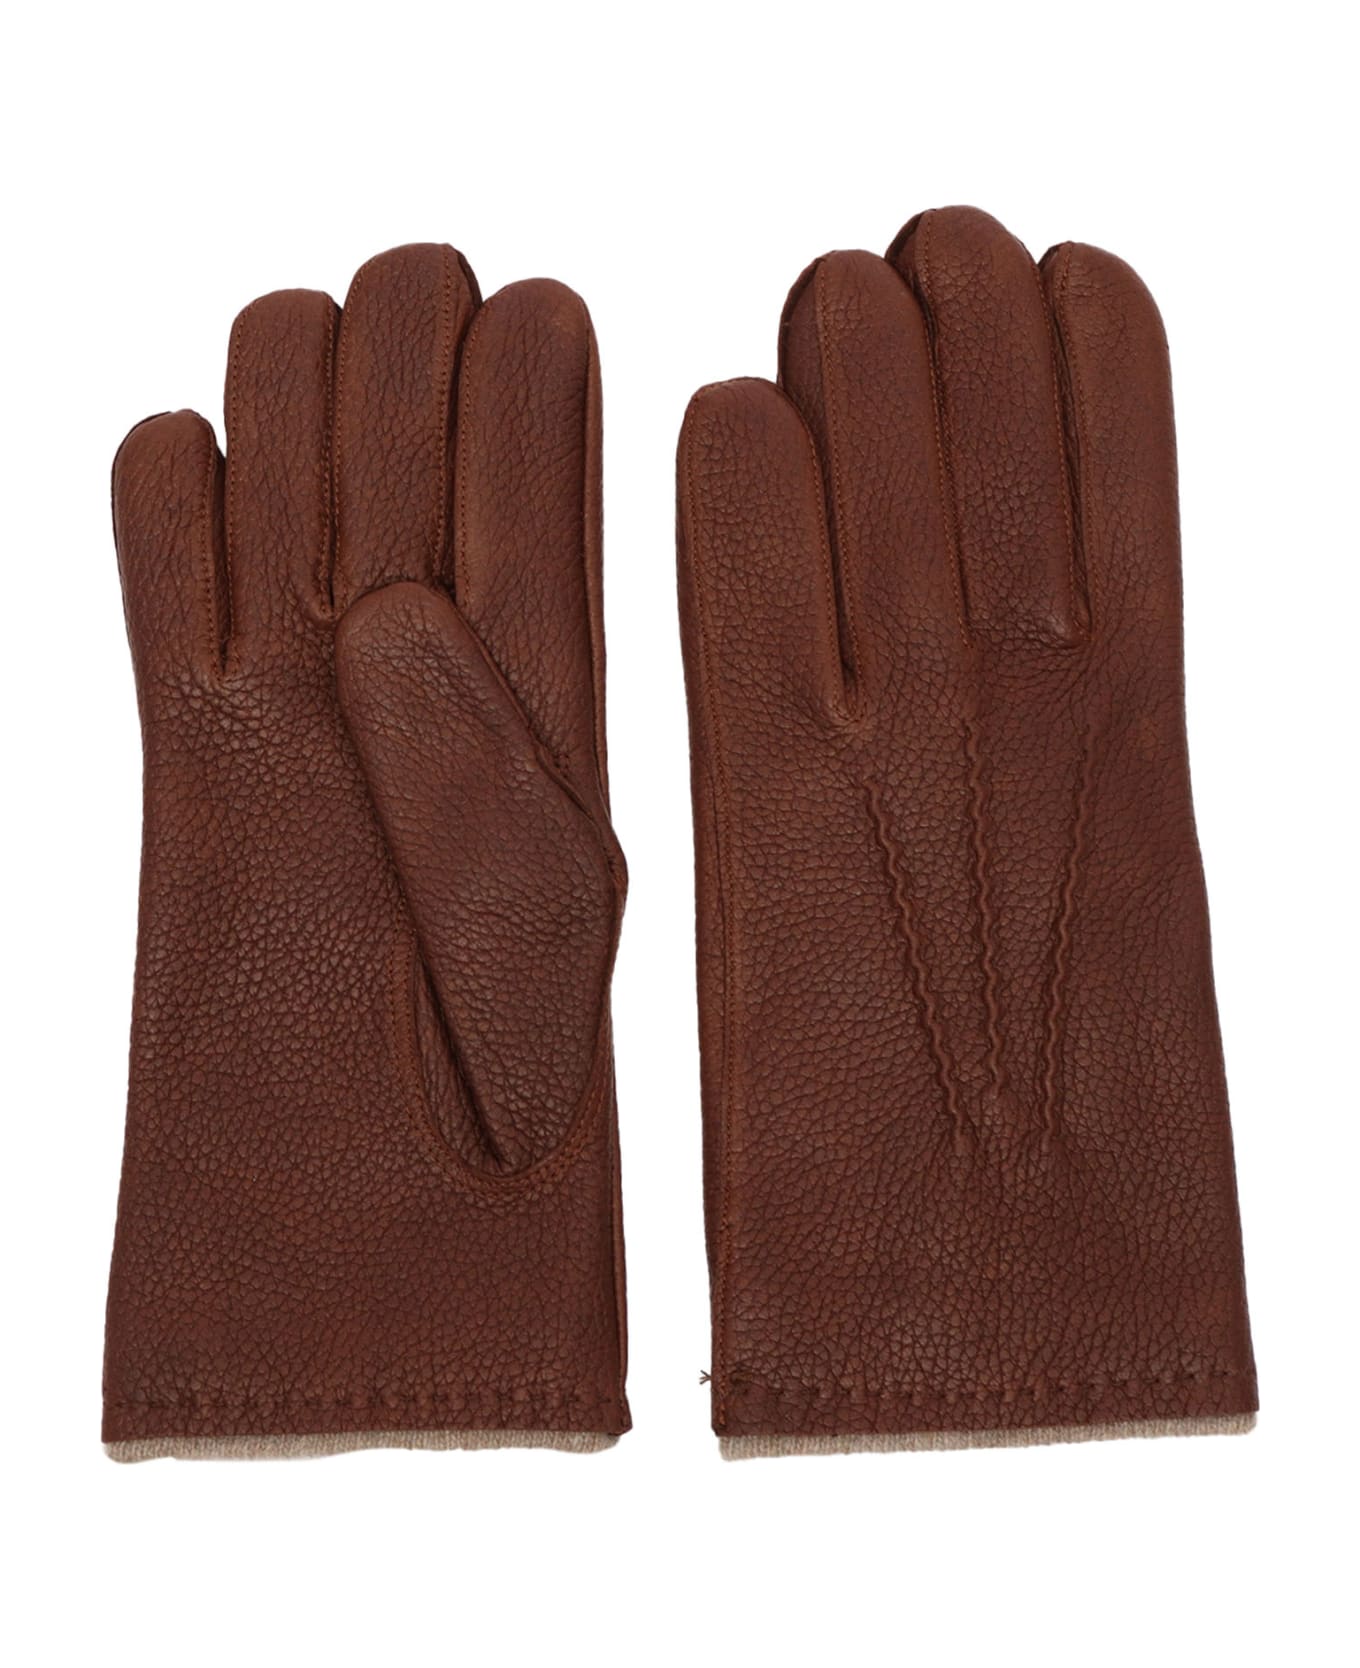 Orciani Grained Leather Gloves - BROWN